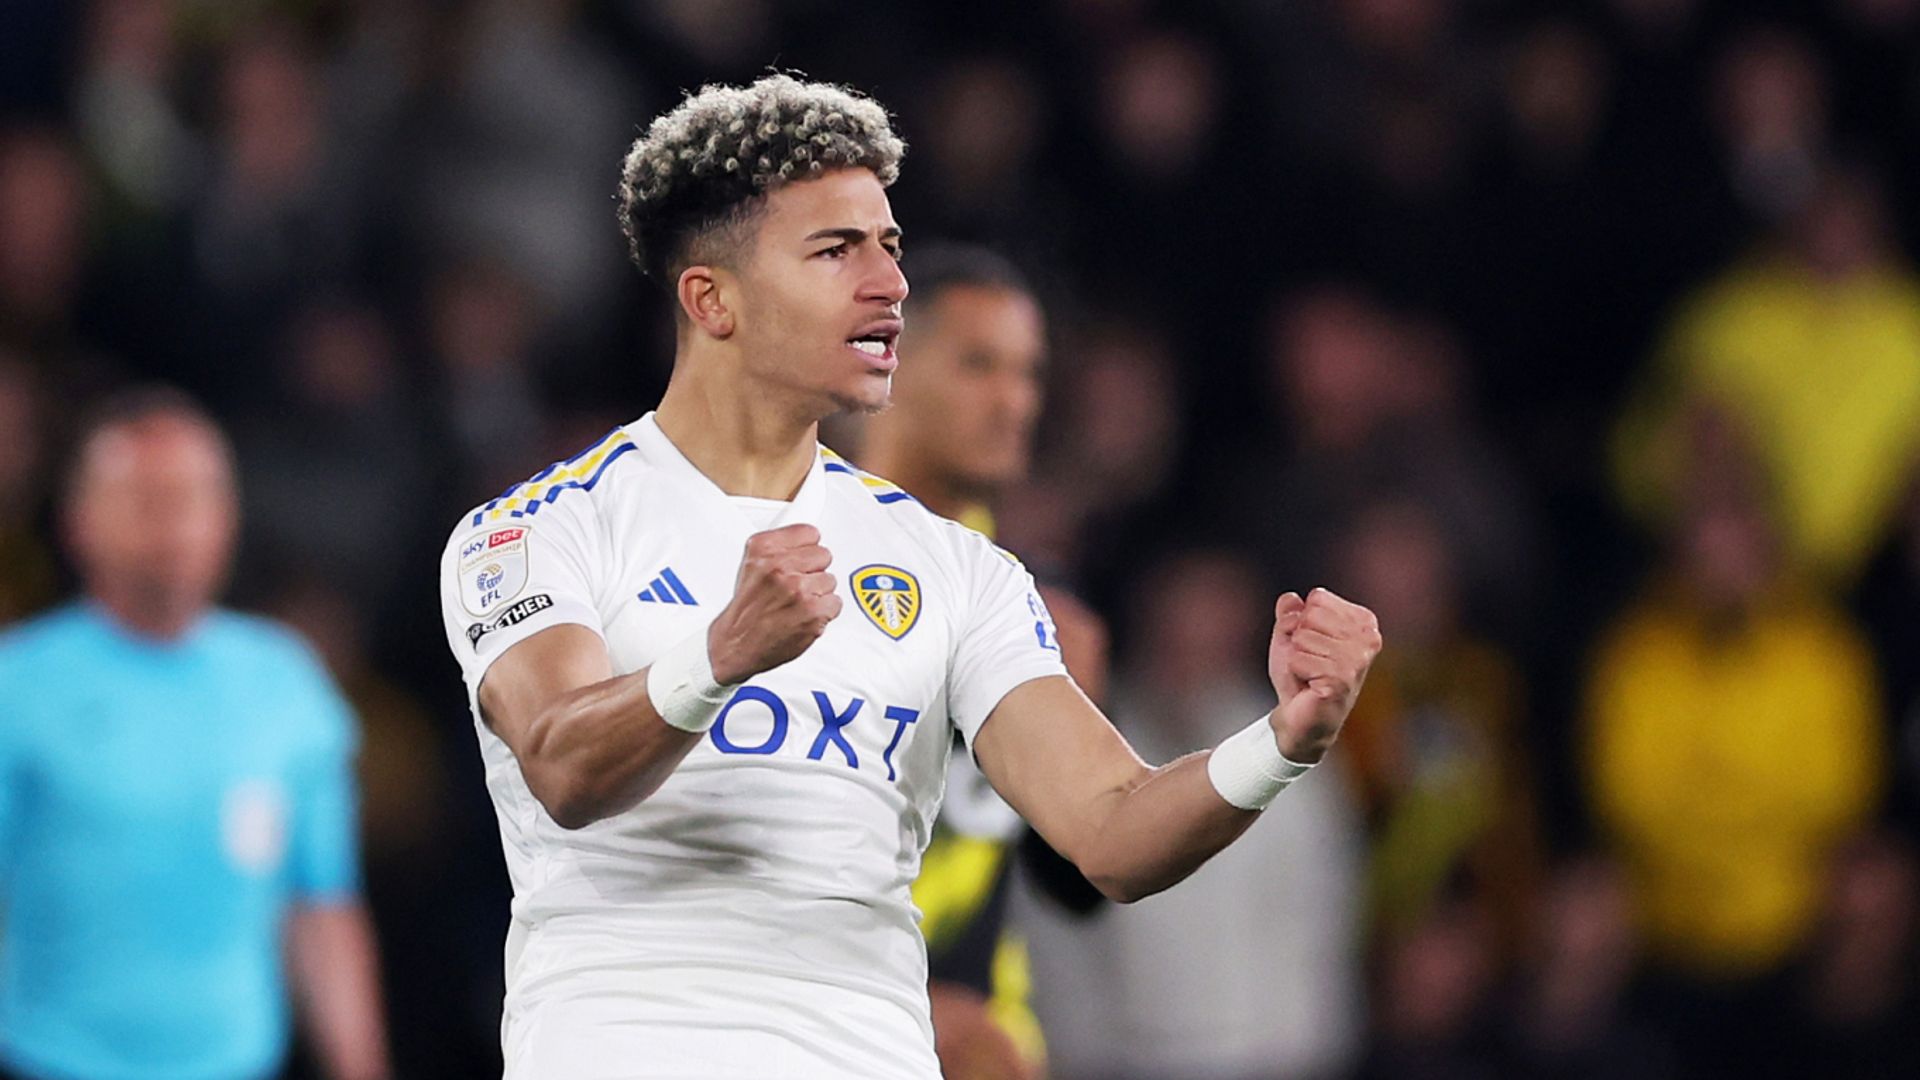 Leeds secure late point at Watford but miss chance to reclaim top spot